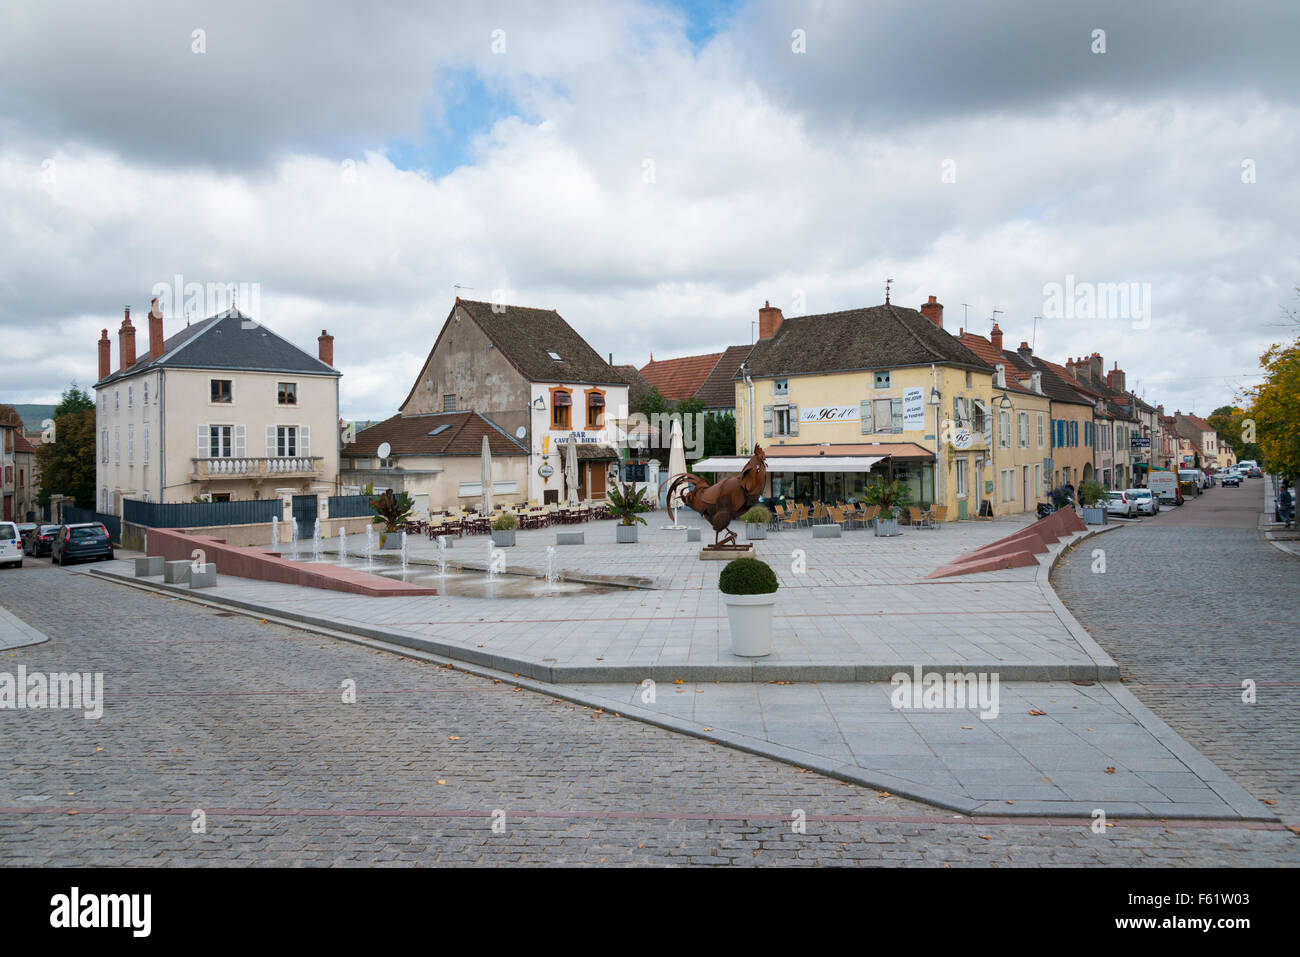 Shops and buildings in a street scene in the town of Chagny France Stock Photo